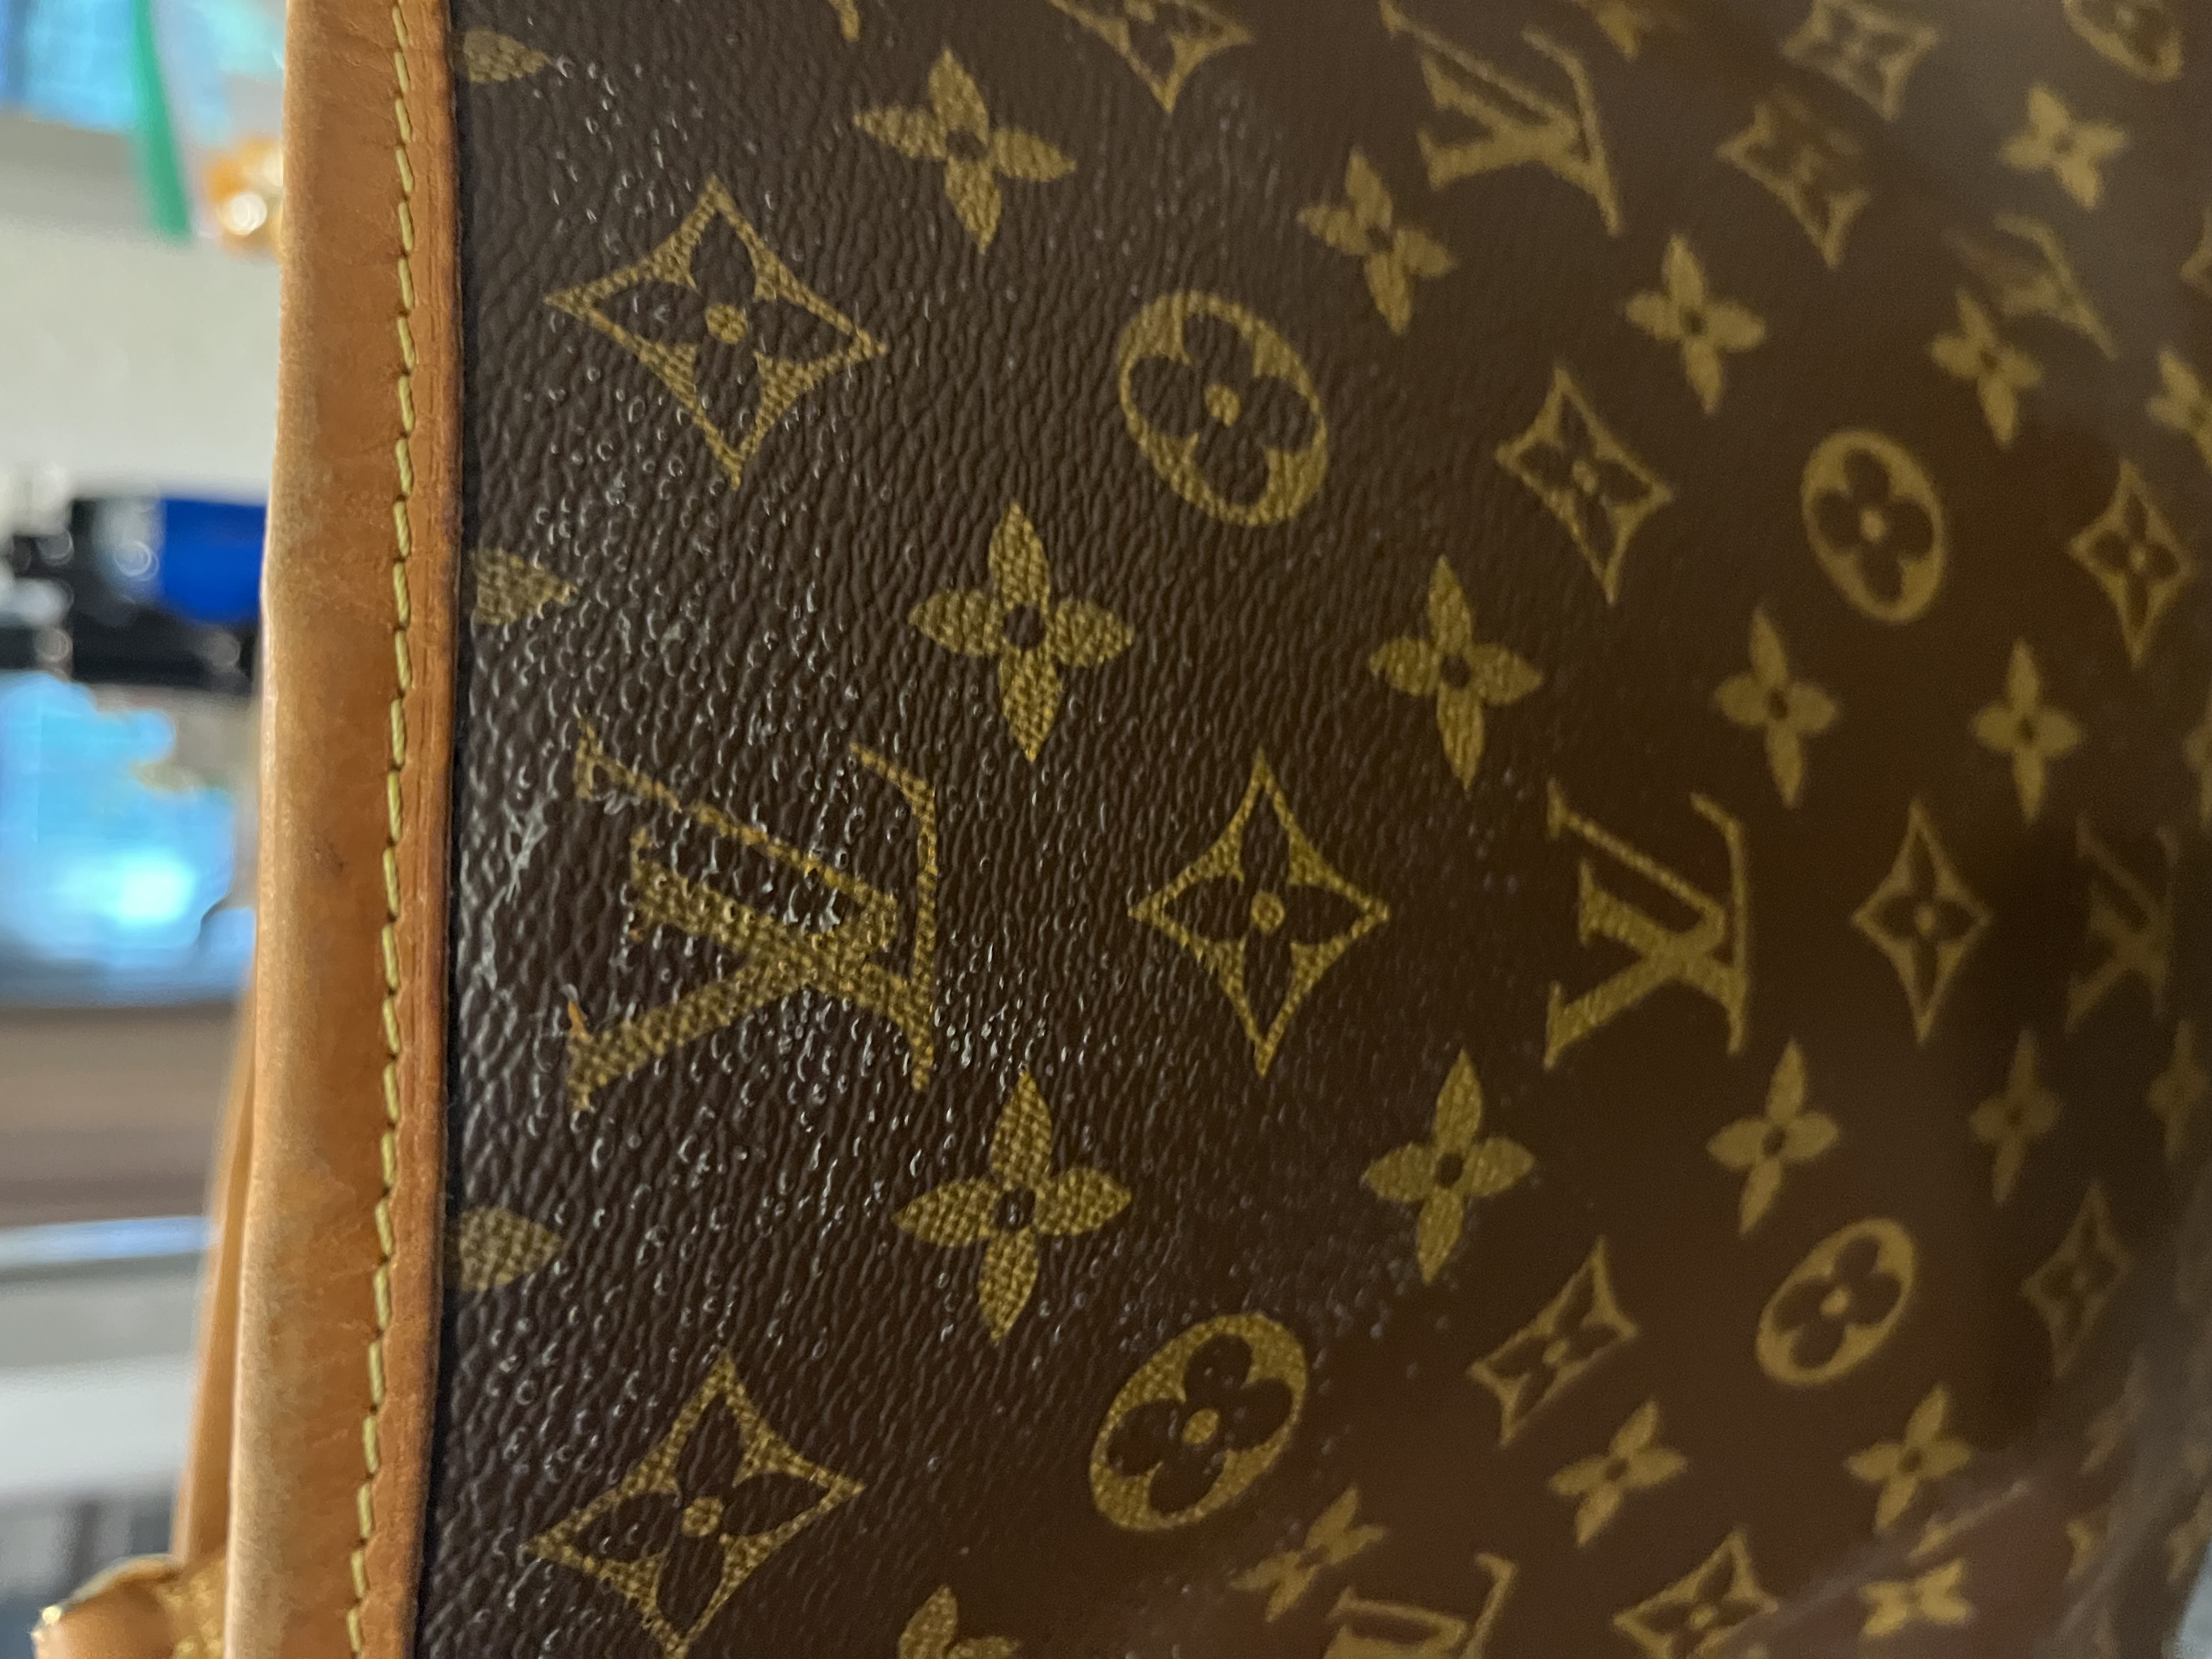 Buy Used Louis Vuitton Handbags, Jewelry & Accessories - Bag Borrow or Steal